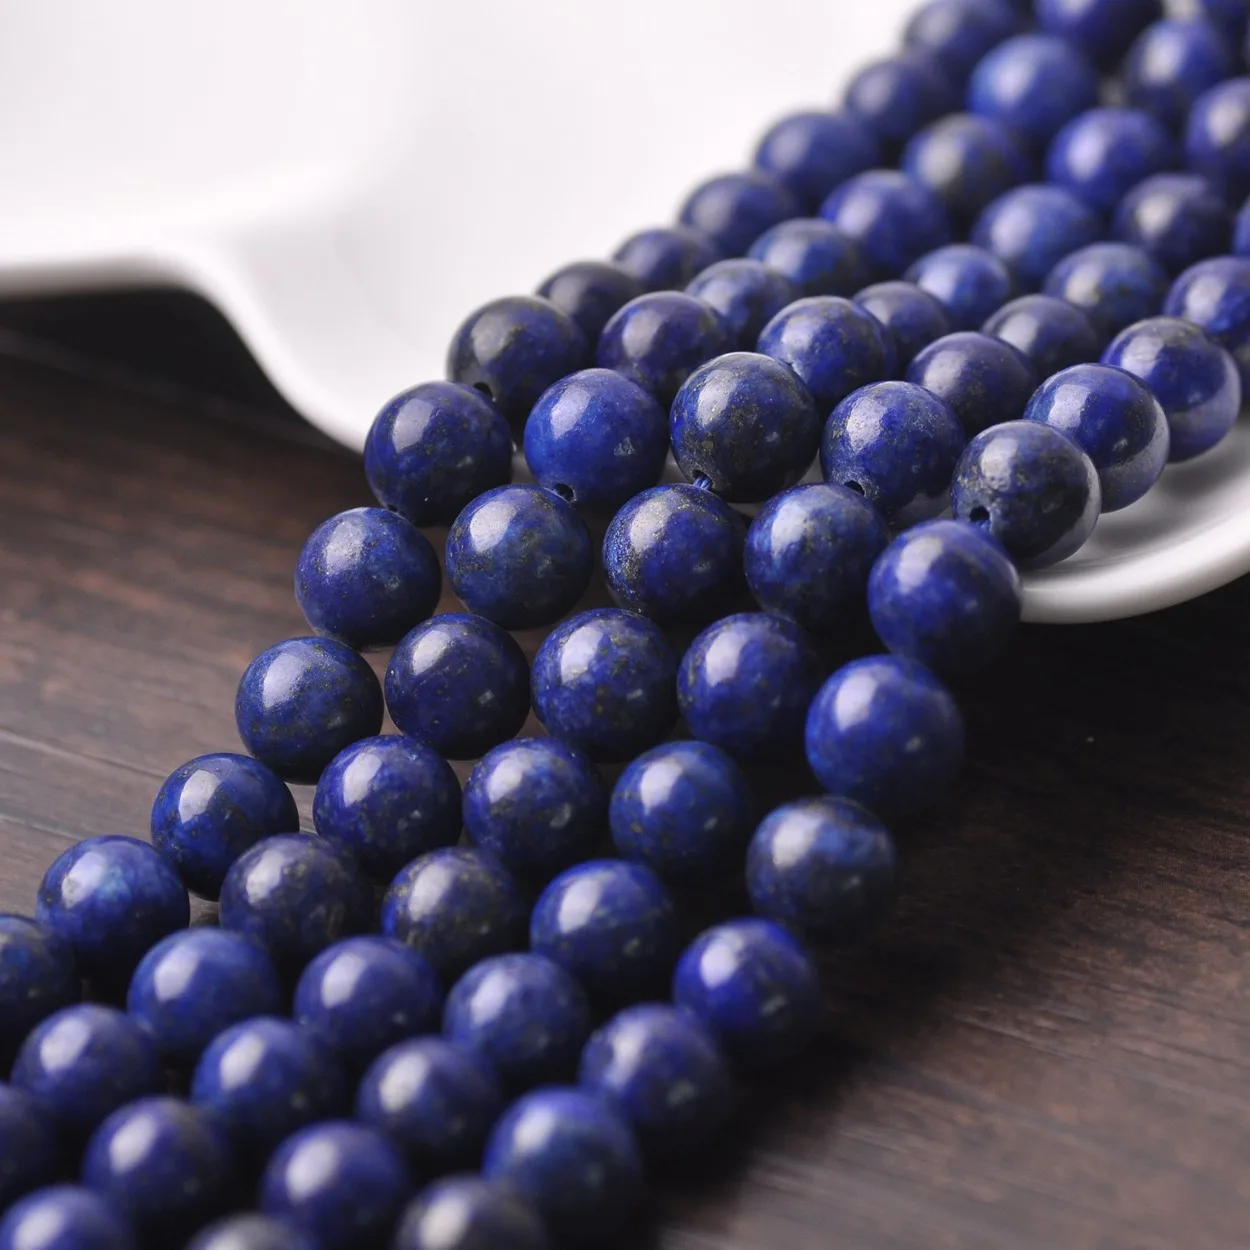 

4mm 6mm 8mm 10mm 12mm 14mm Round Natural Lapis Lazuli Stone Loose Beads Lot For Jewelry Making DIY Crafts Findings